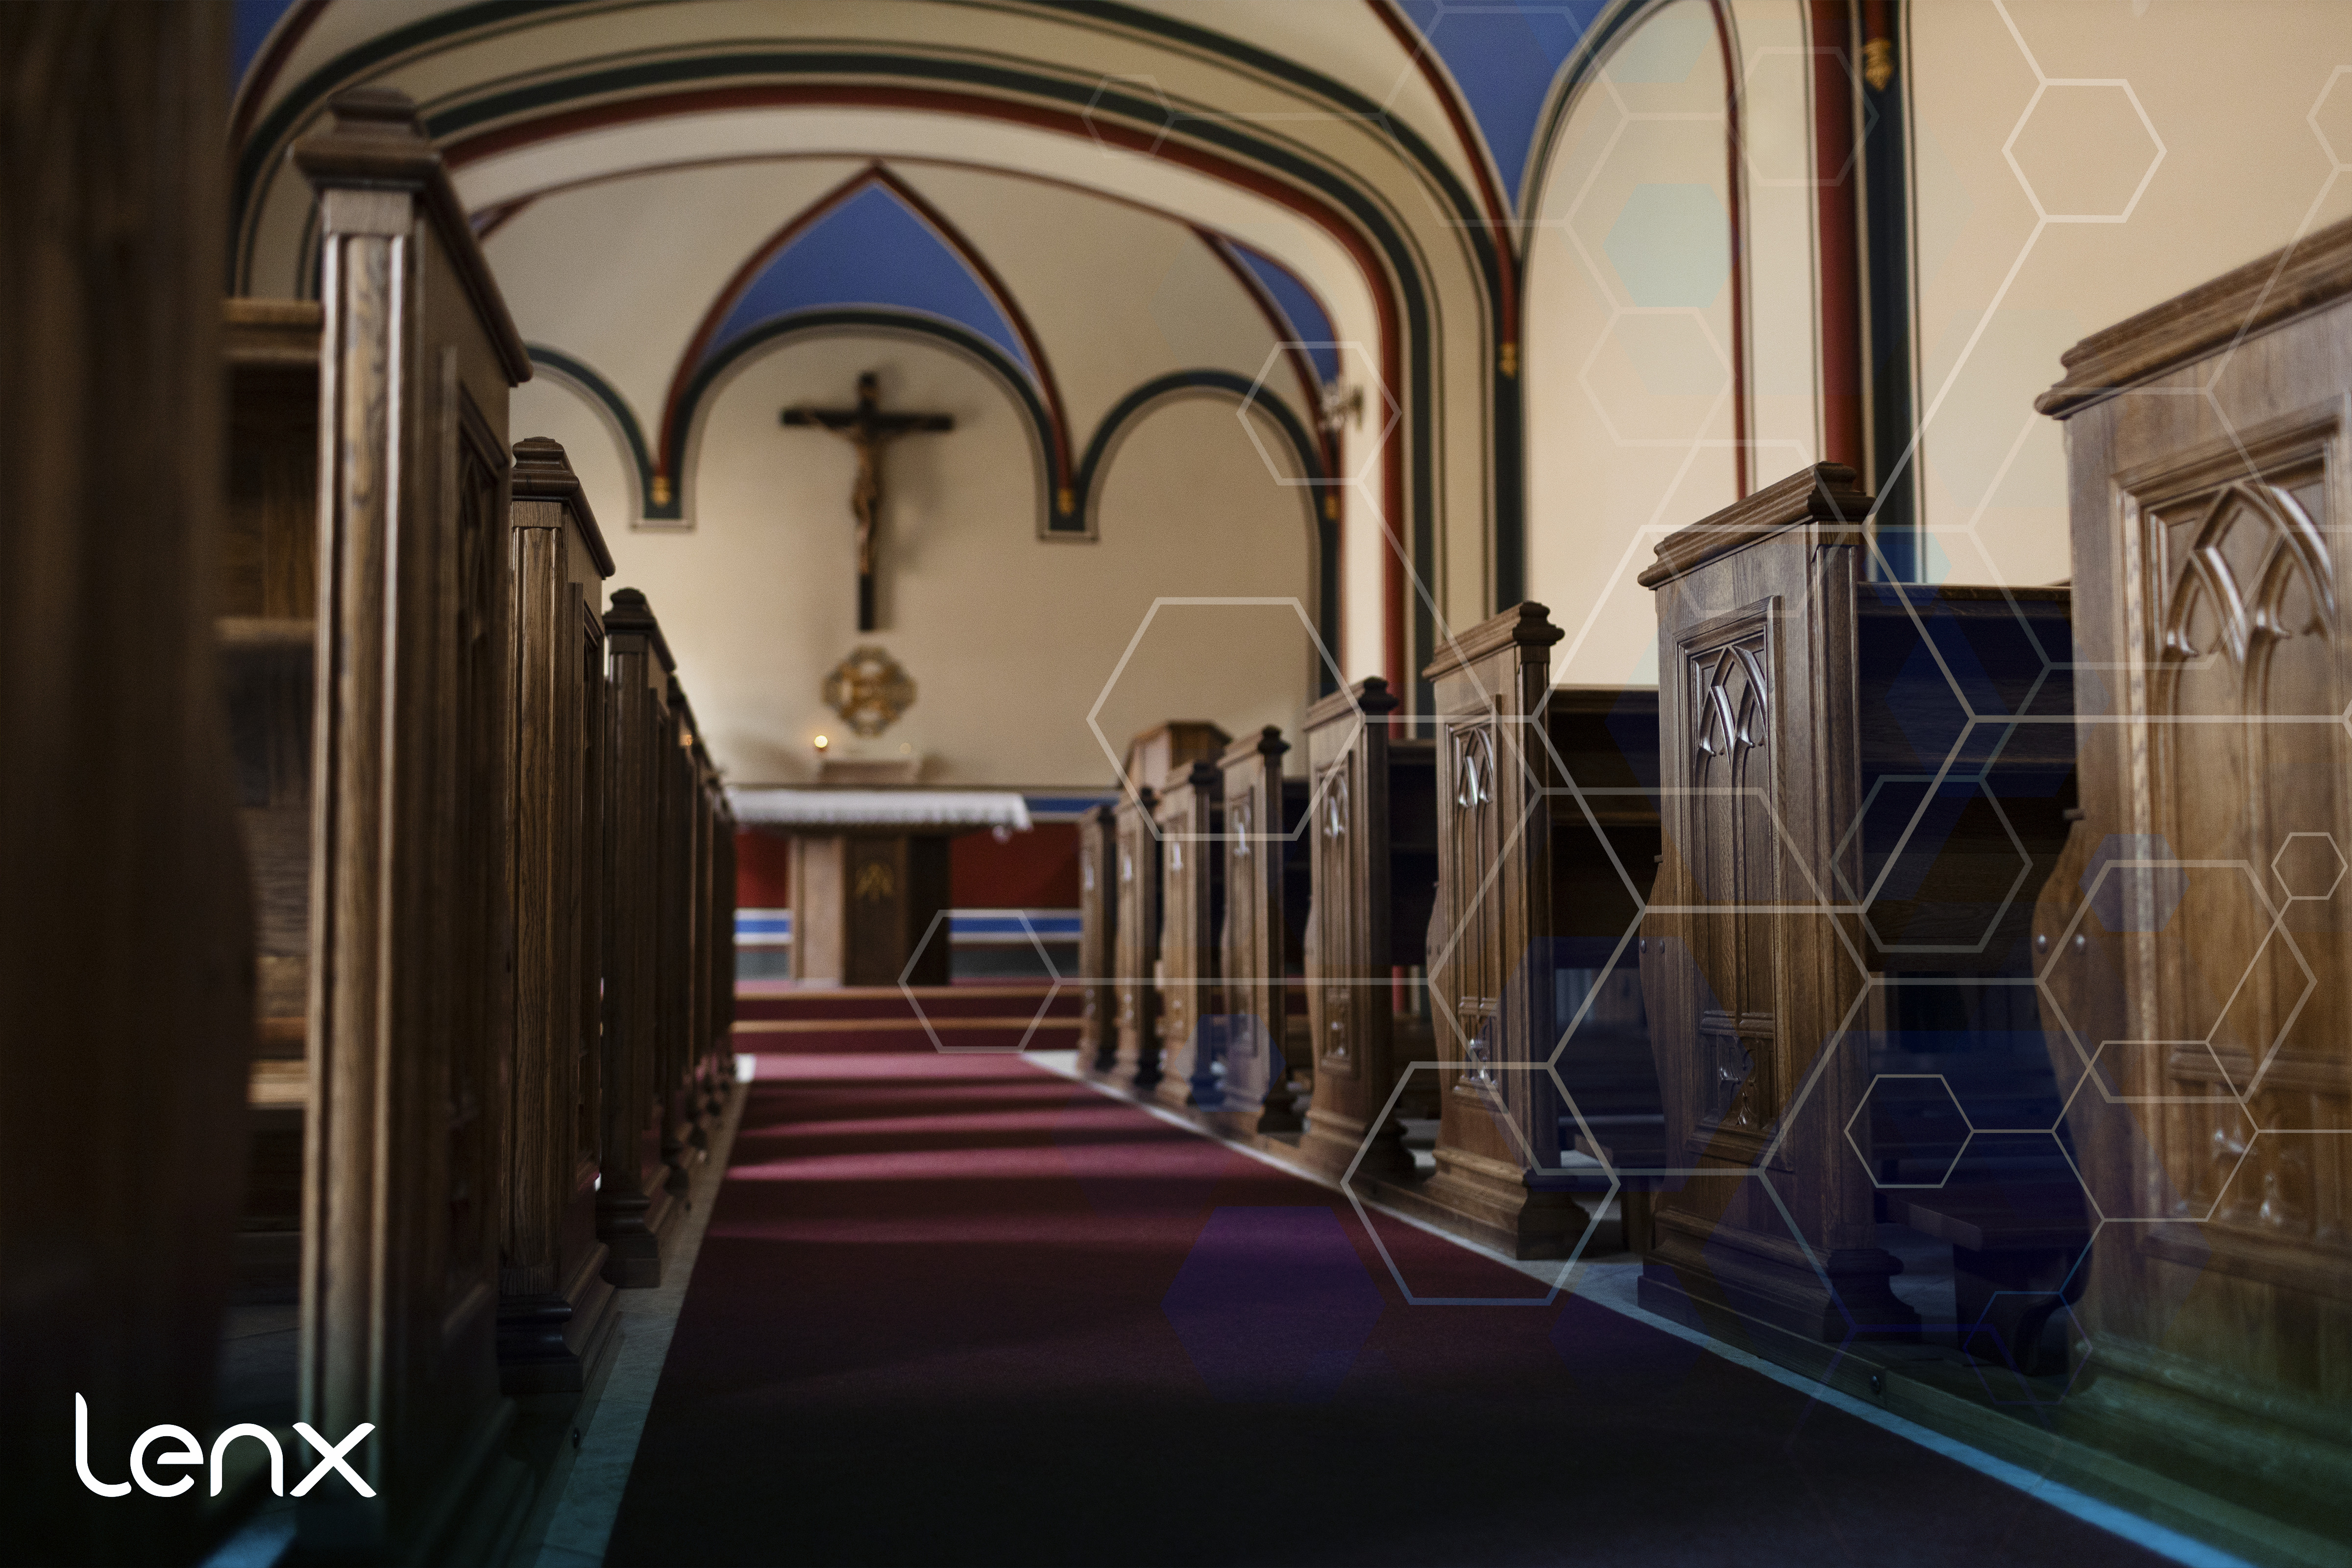 Protecting Houses of Worship: Using AI Security and Active Shooter Detection